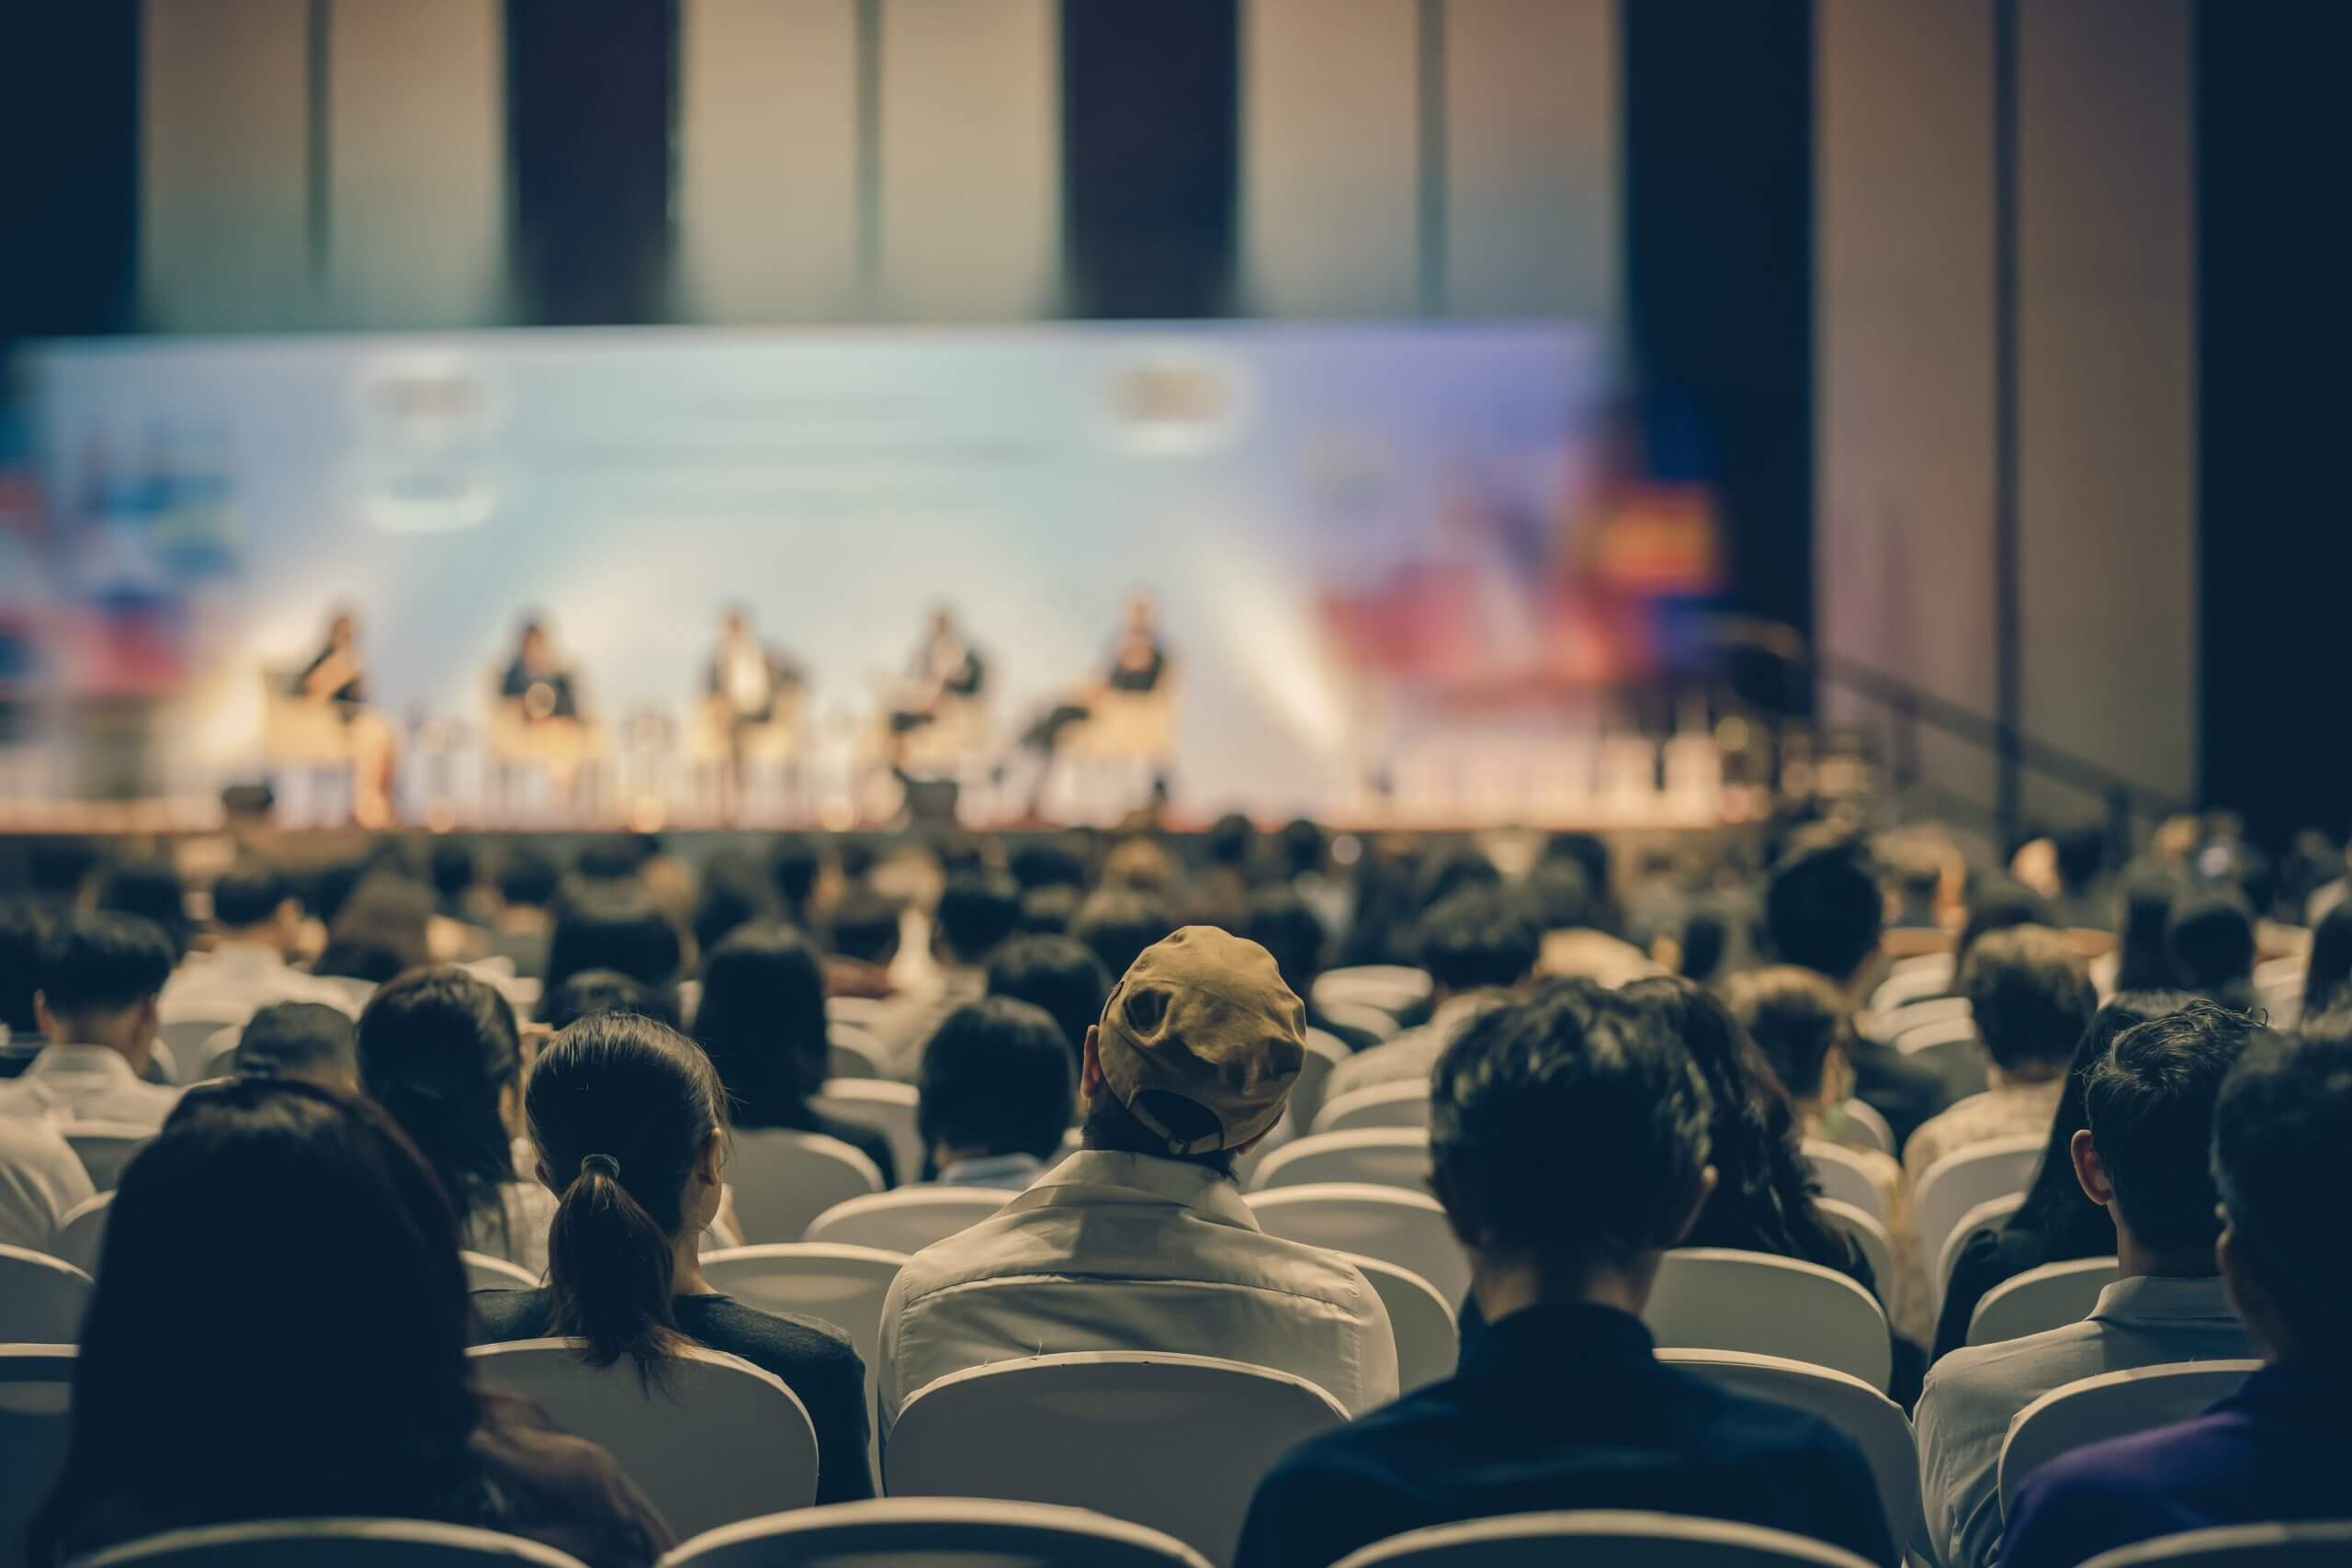 B2B events, technology conferences